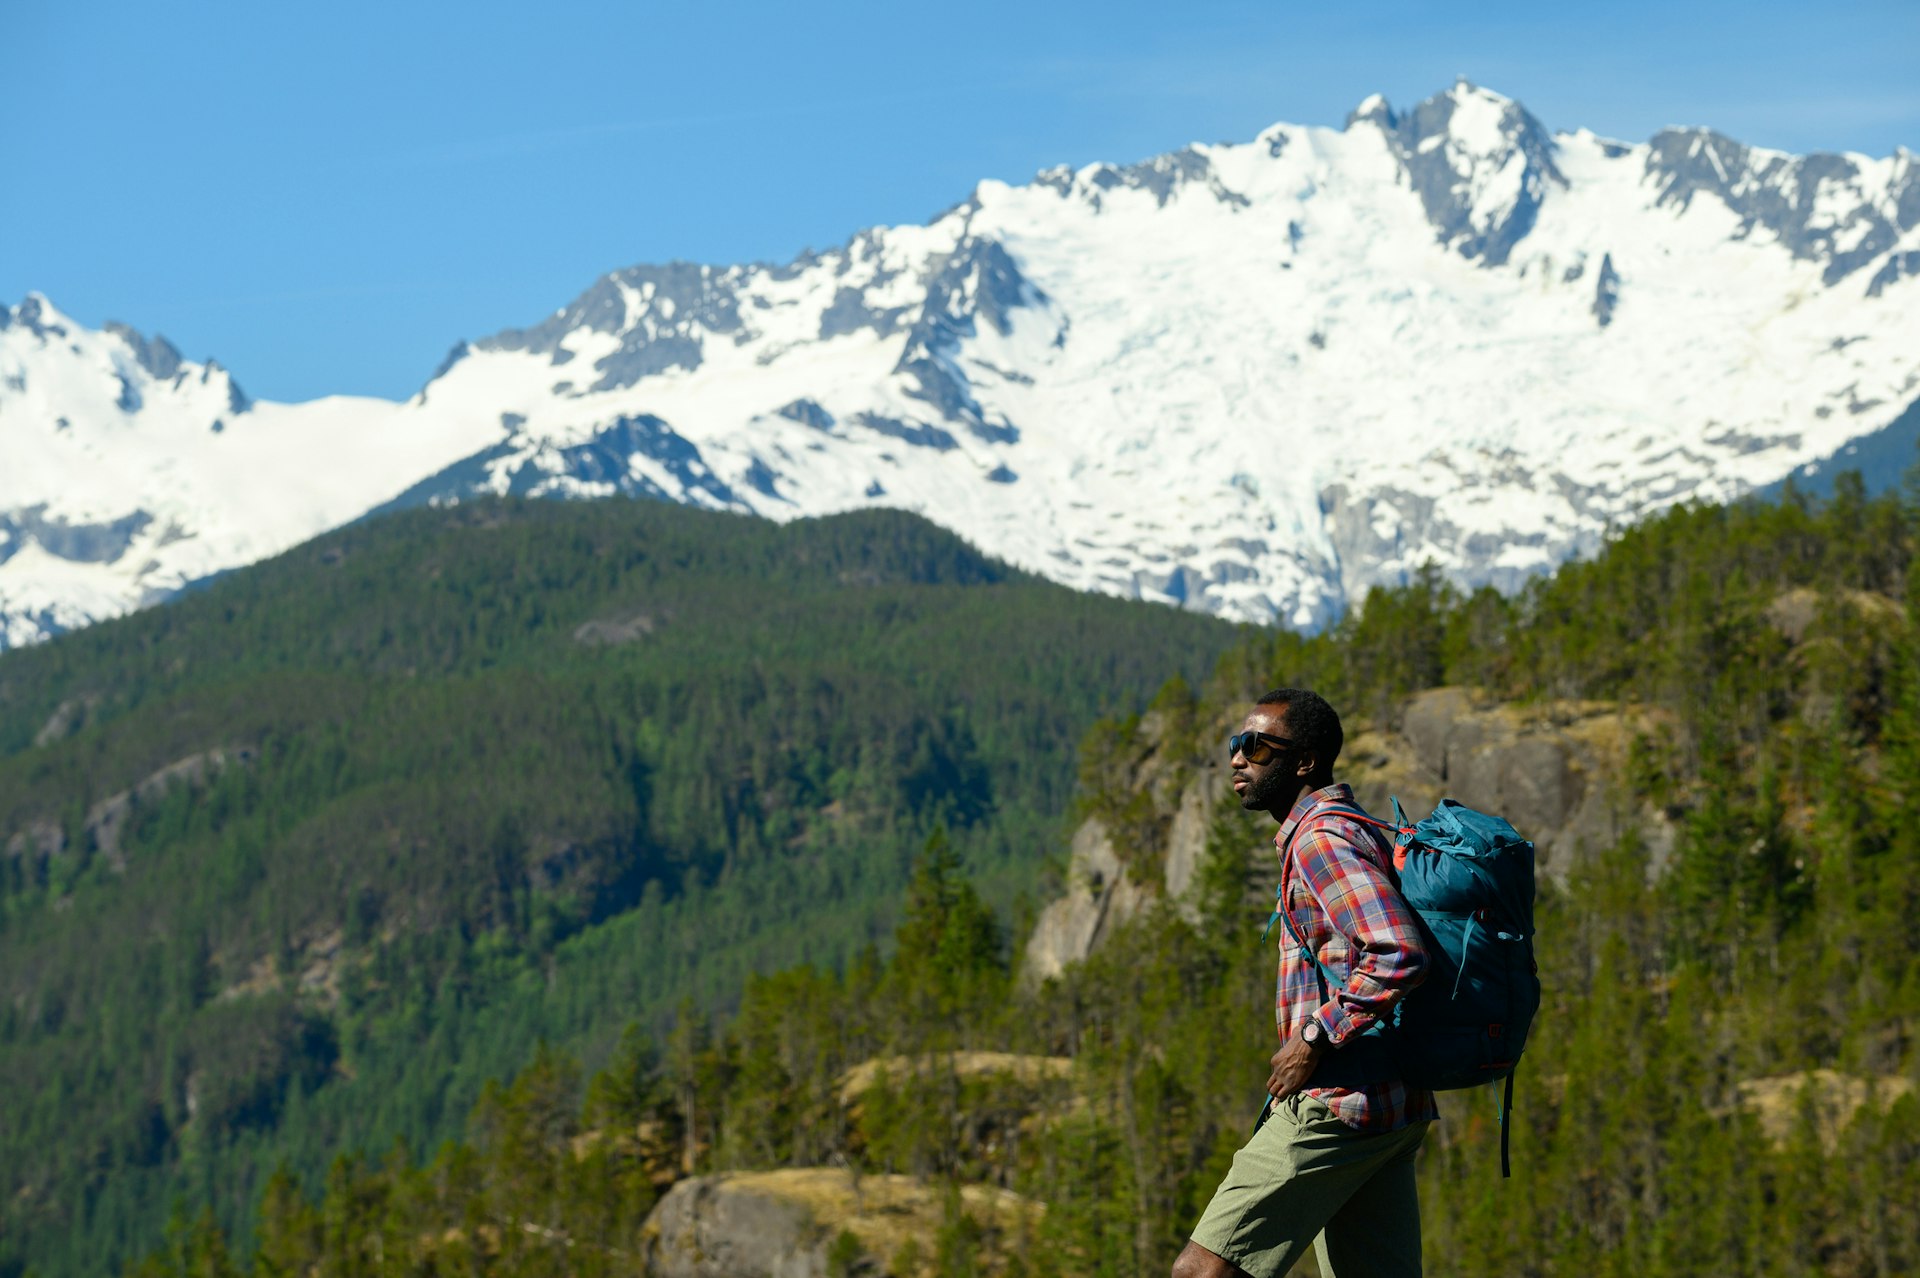 A male hiker looking away while standing against mountains, Canada